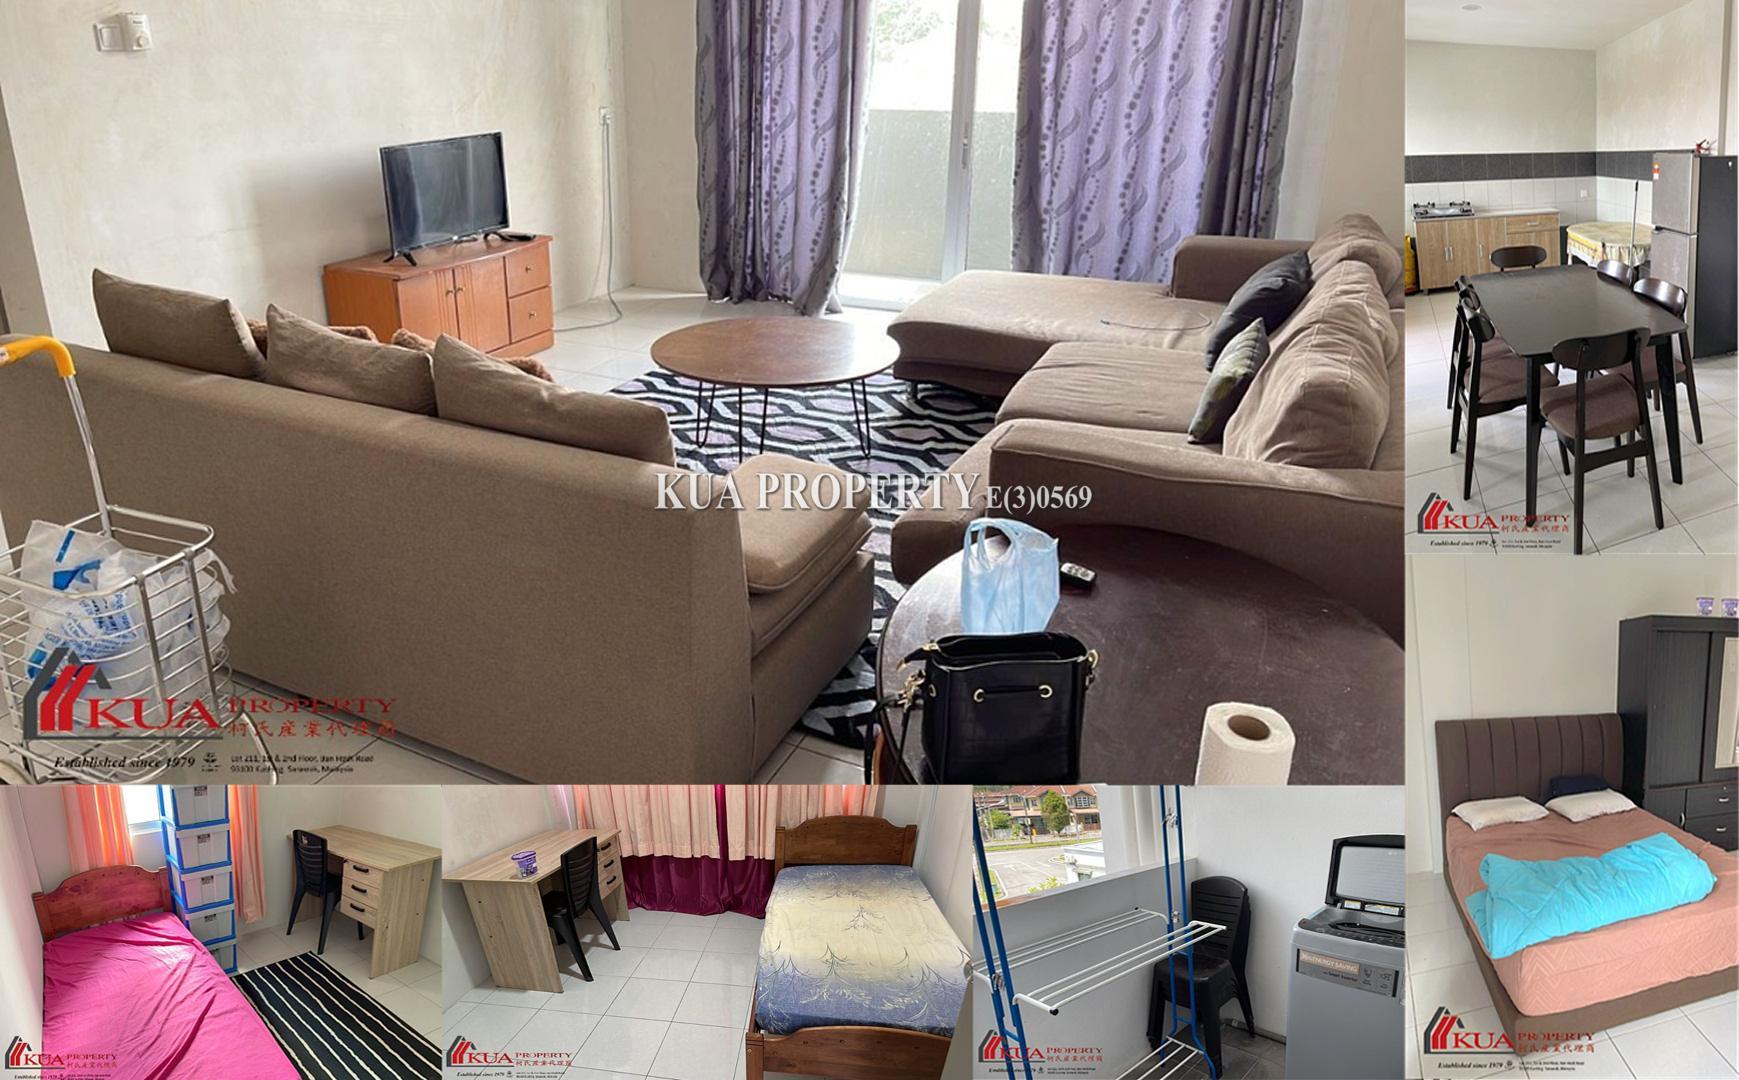 Stutong Heights Apartment For Rent! at Stutong, Kuching